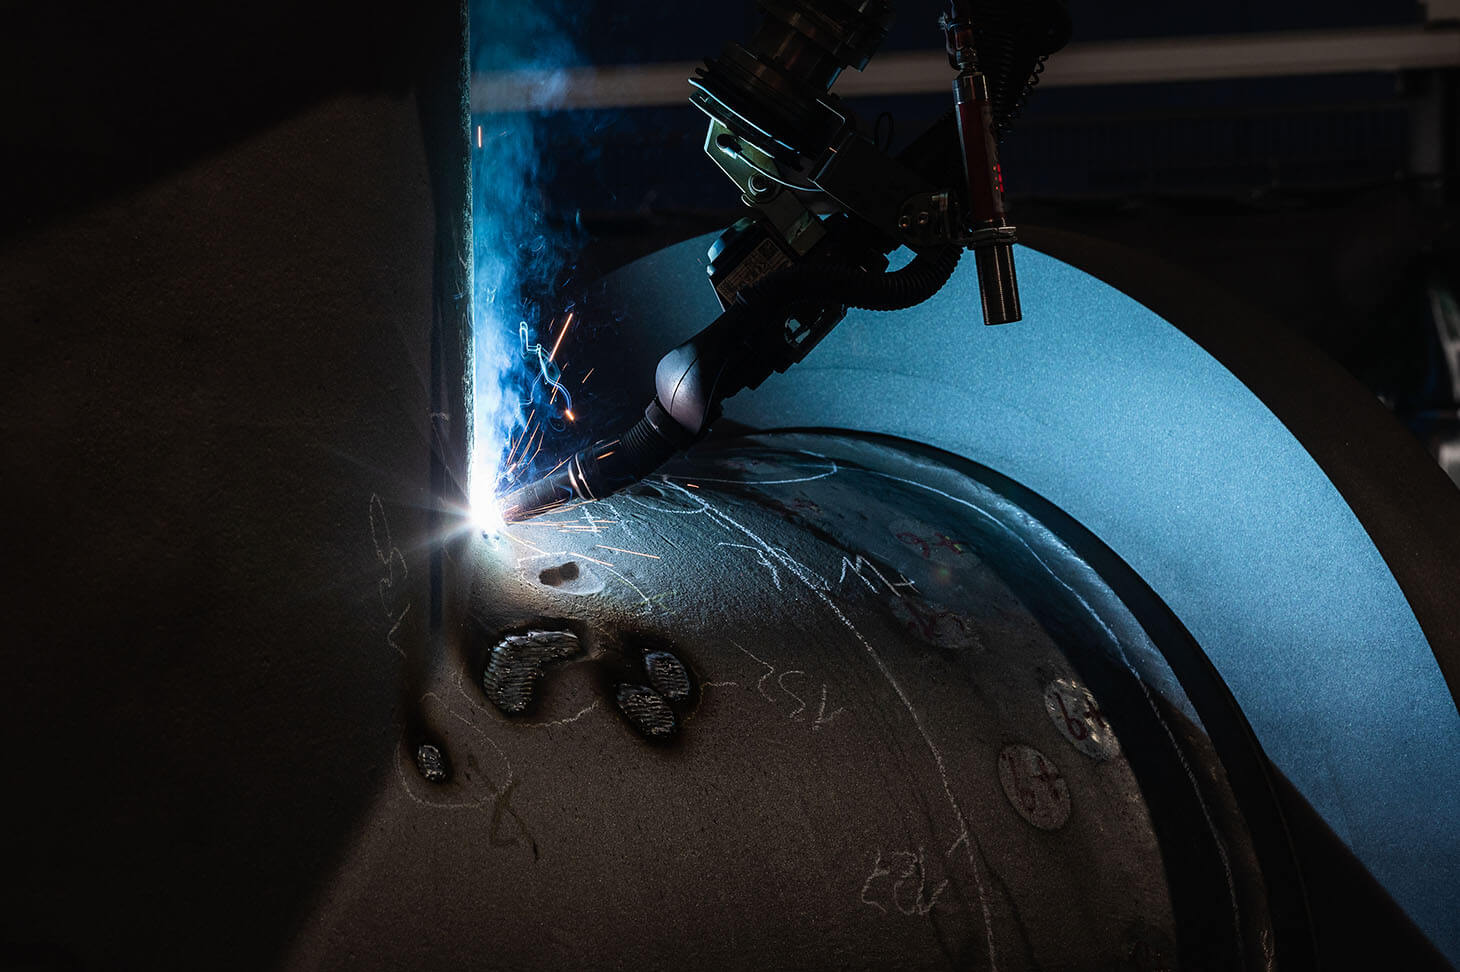 Close-up of robot welding system at work on a weld seam